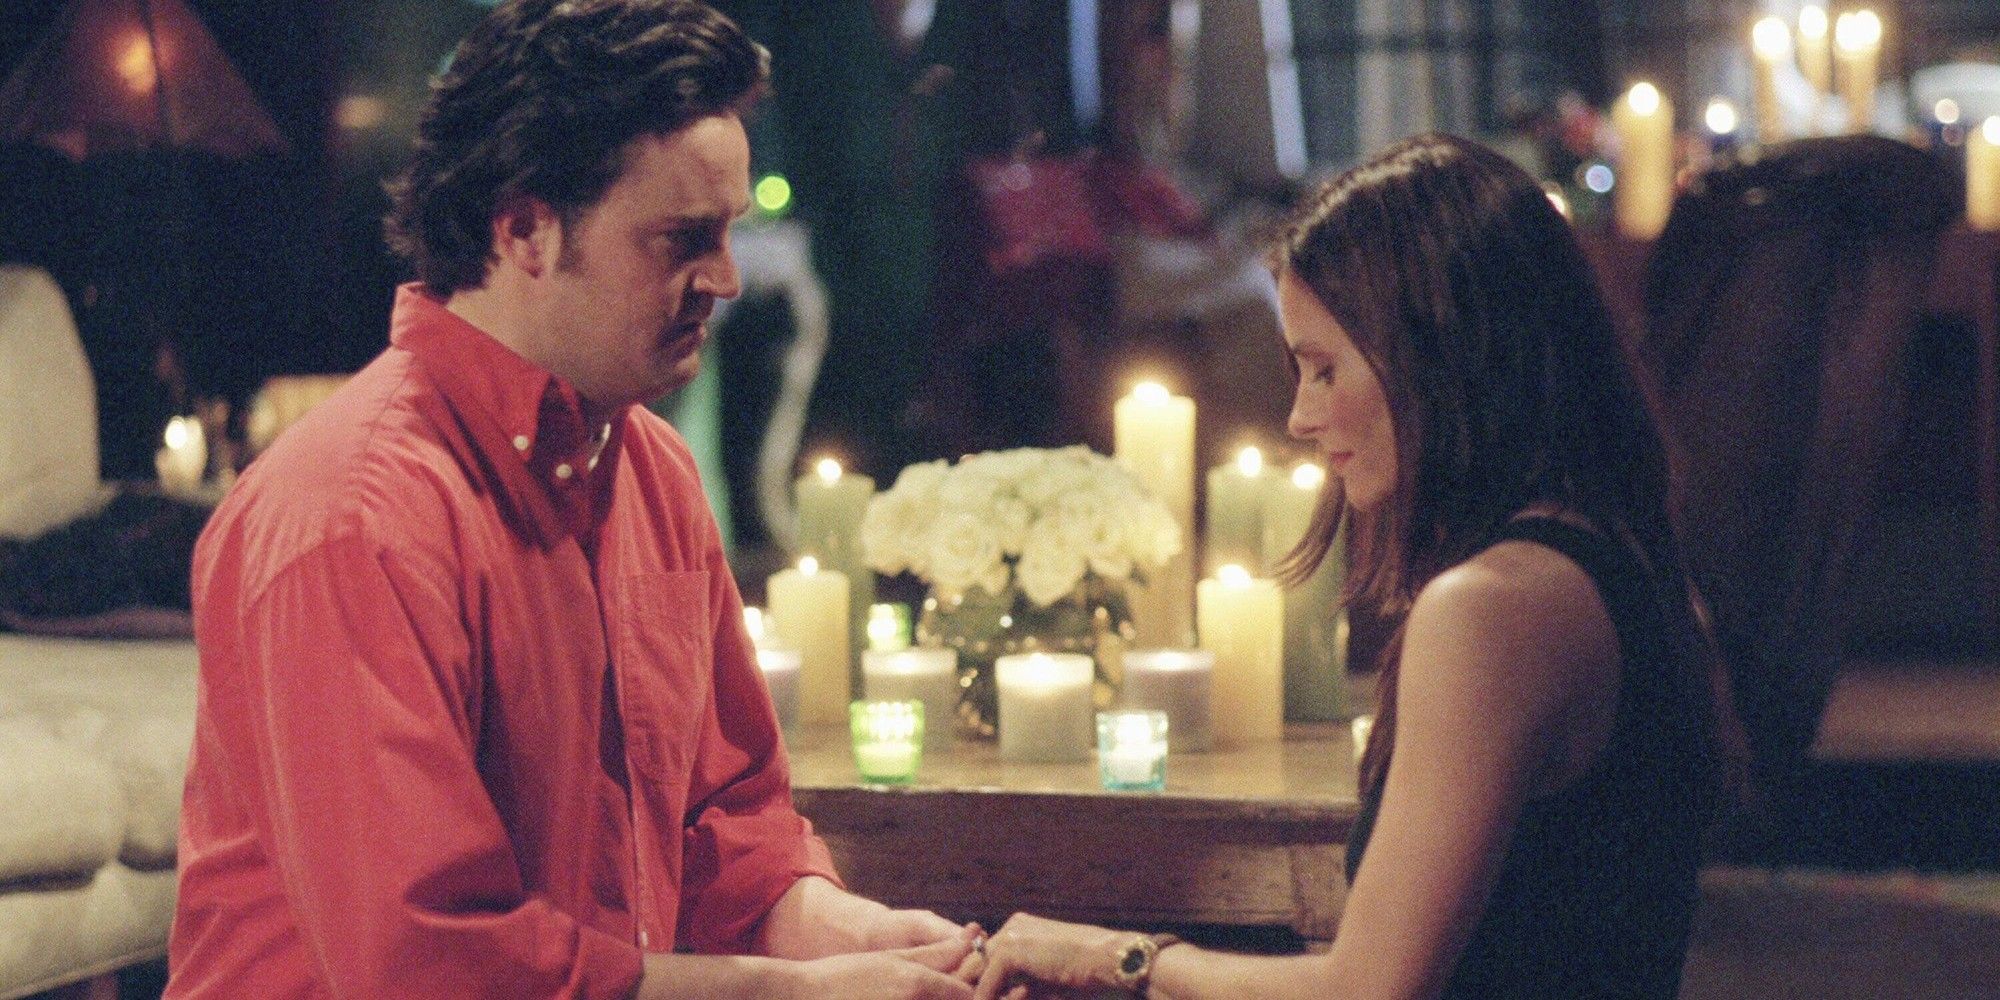 Chandler proposing to Monica in Friends